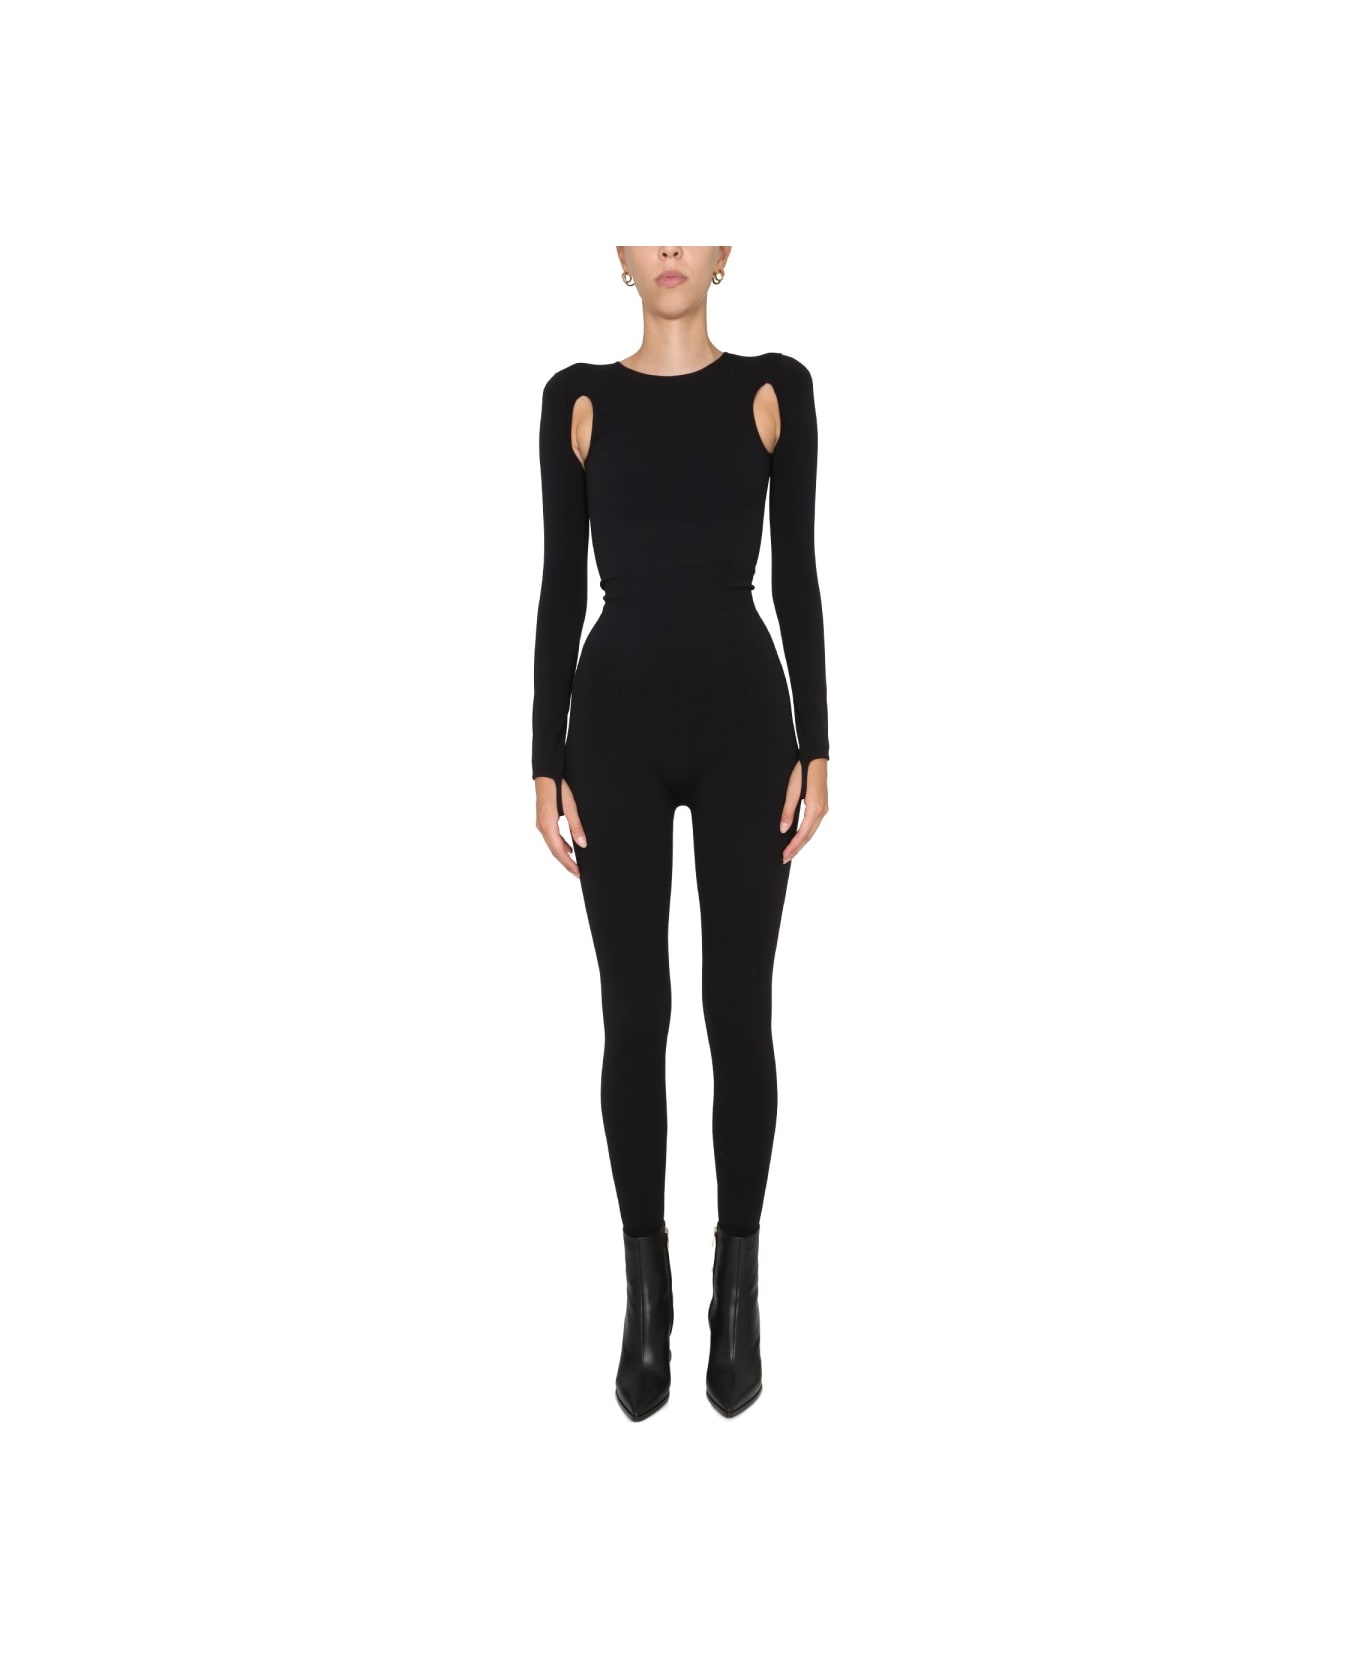 ANDREĀDAMO Full Jumpsuit With Cut-out Details - BLACK ジャンプスーツ